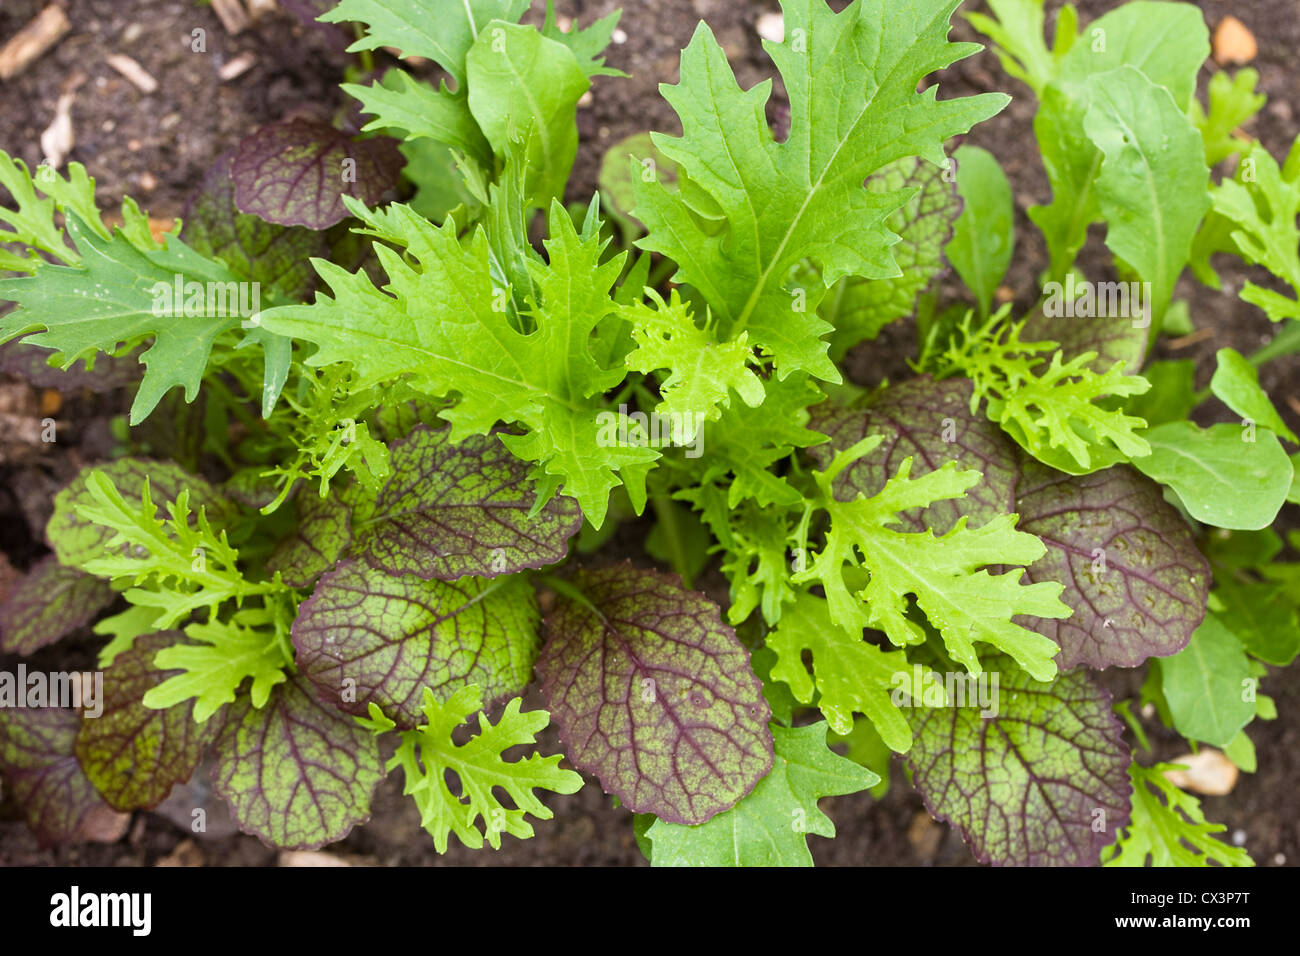 Mixed salad leaves growing in a vegetable garden. Stock Photo